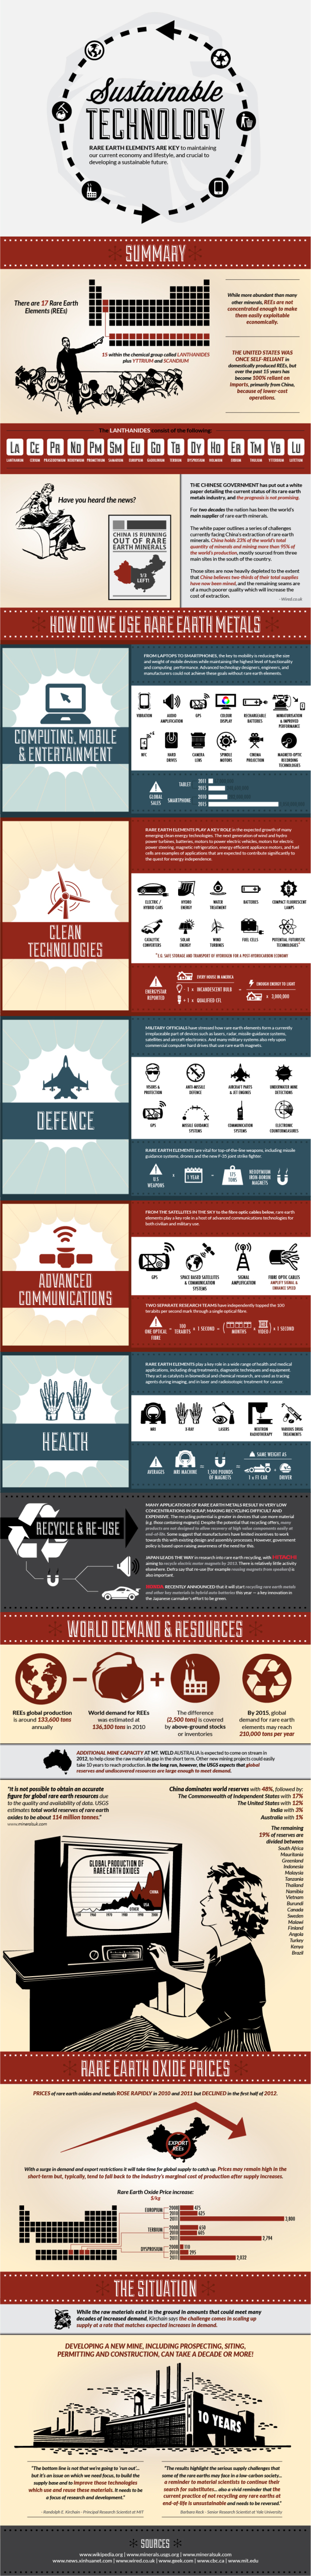 Infographic - Sustainable Technology